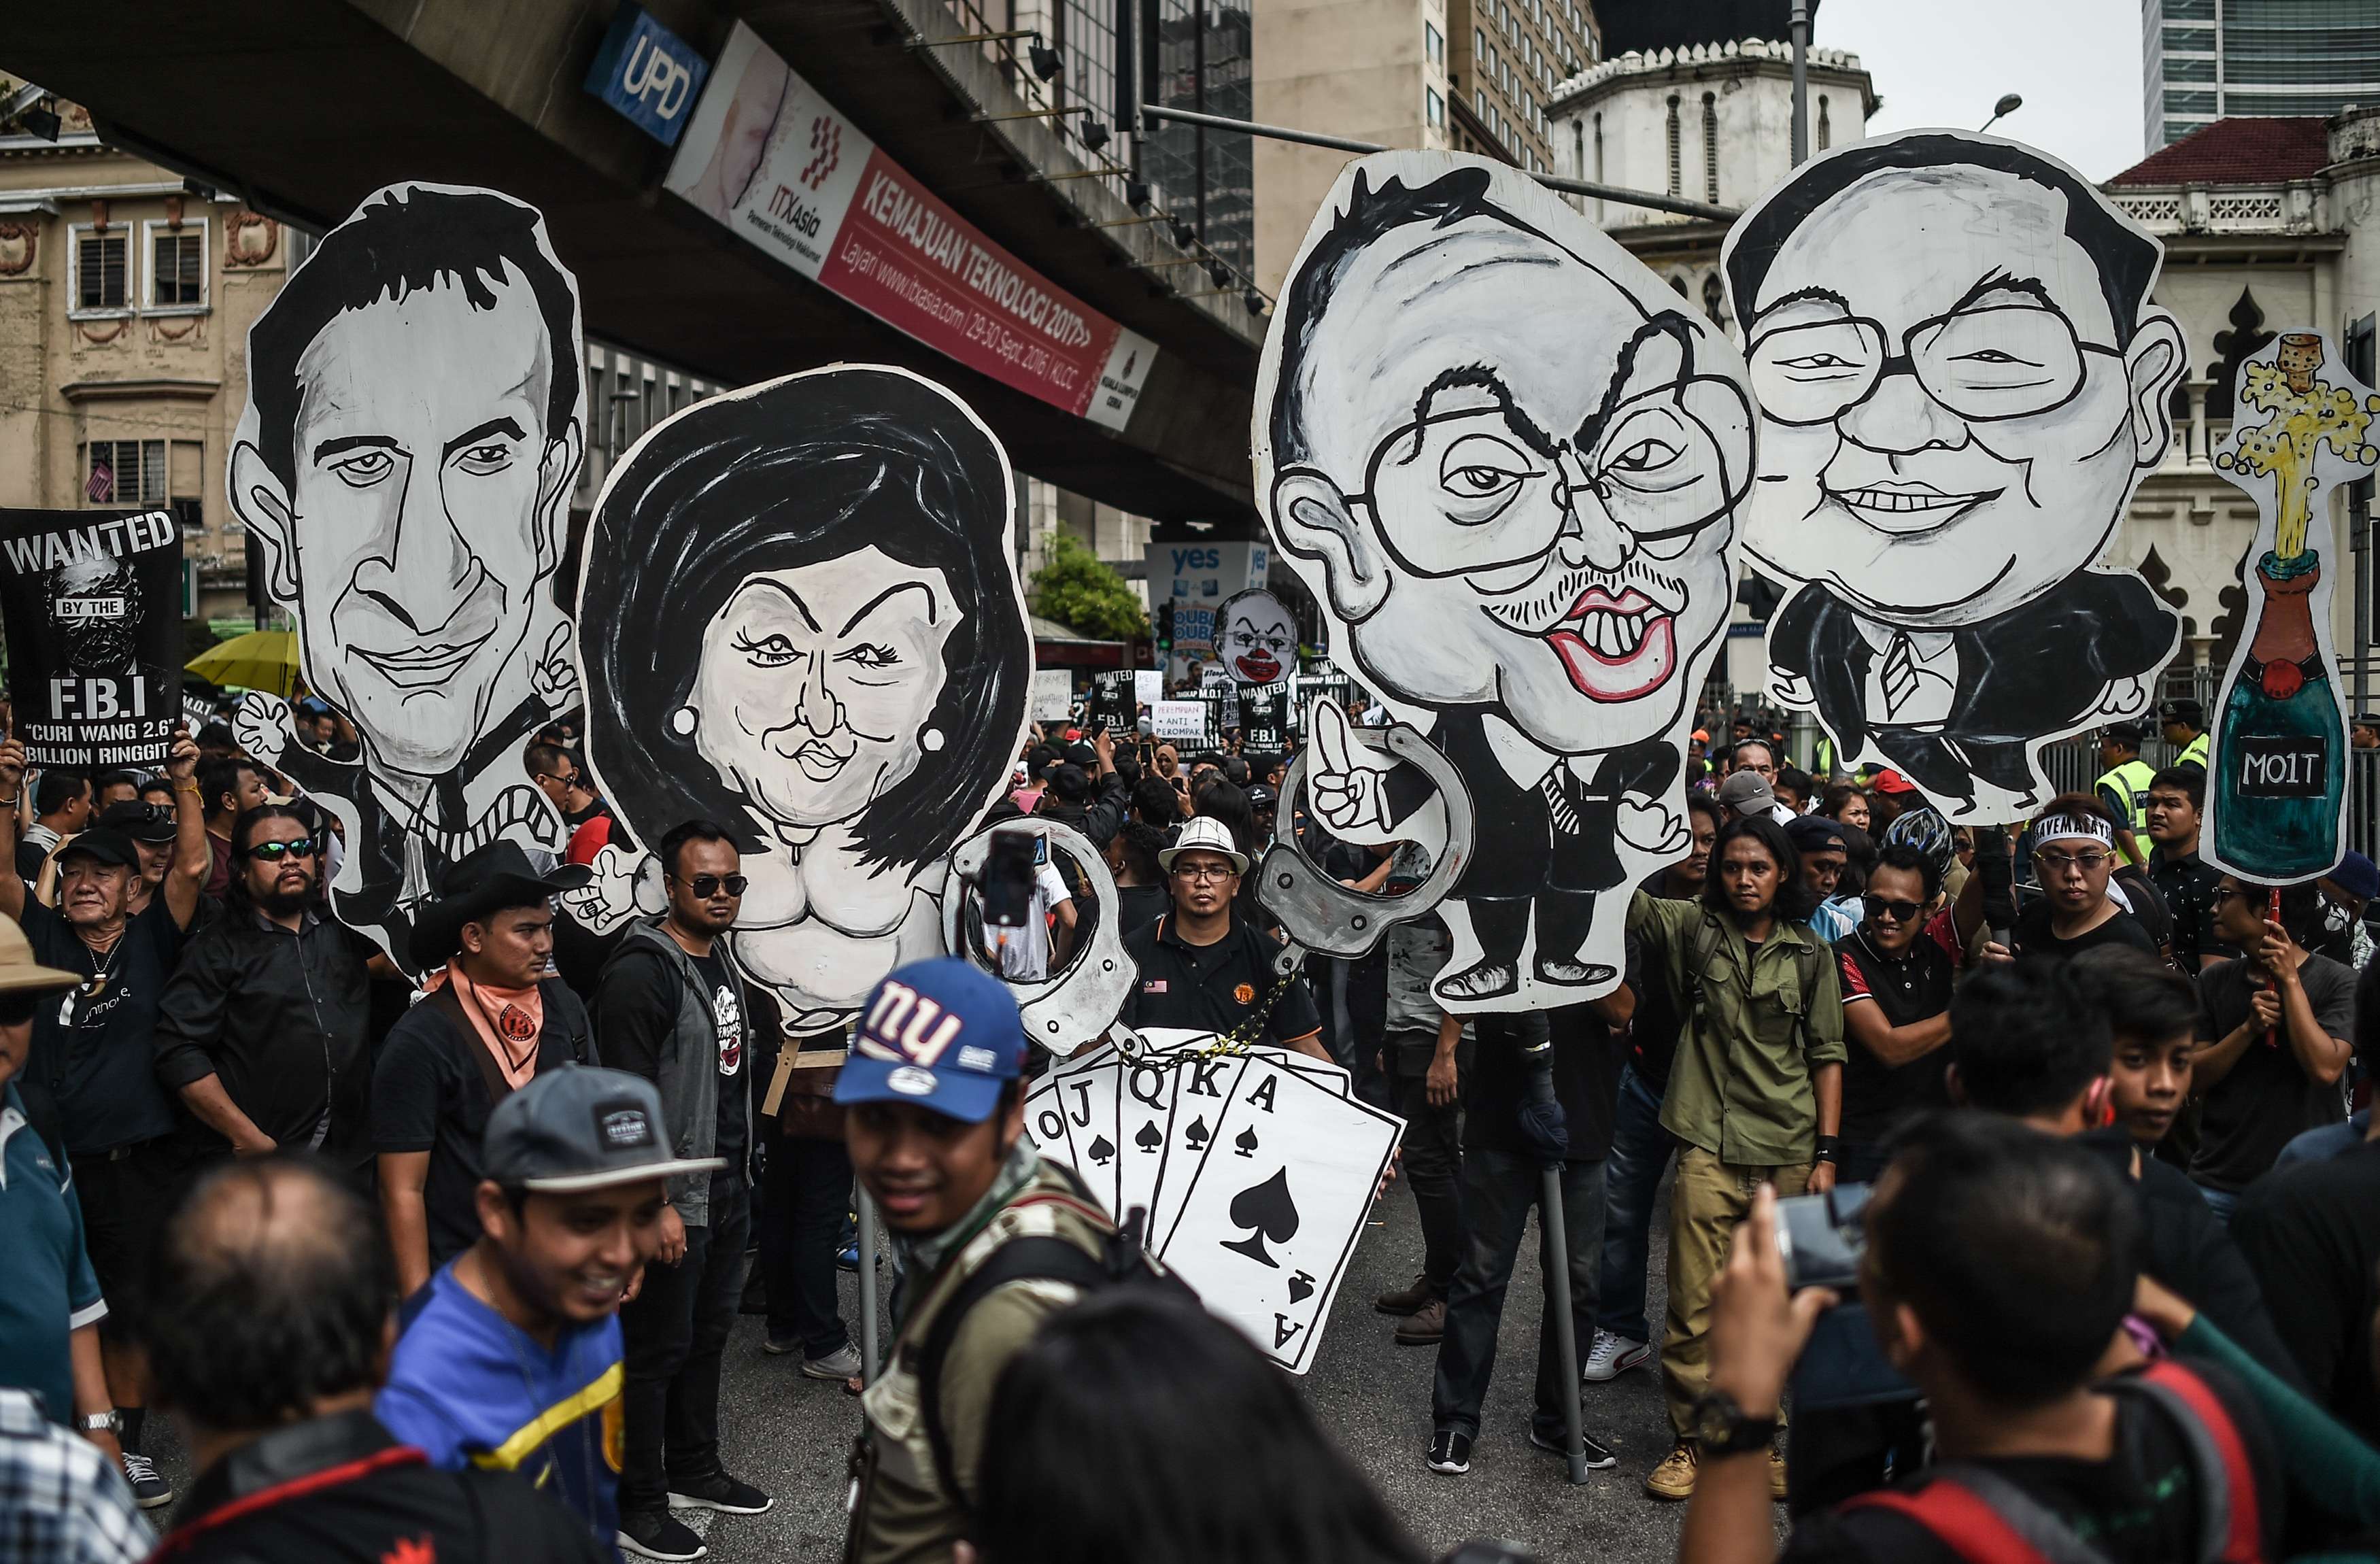 Student activists hold clown-faced caricatures of Malaysian Prime Minister Najib Razak (second right) and his wife Rosmah Mansor (second left) during a protest over the 1MDB scandal in Kuala Lumpur in August 2016. Photo: AFP